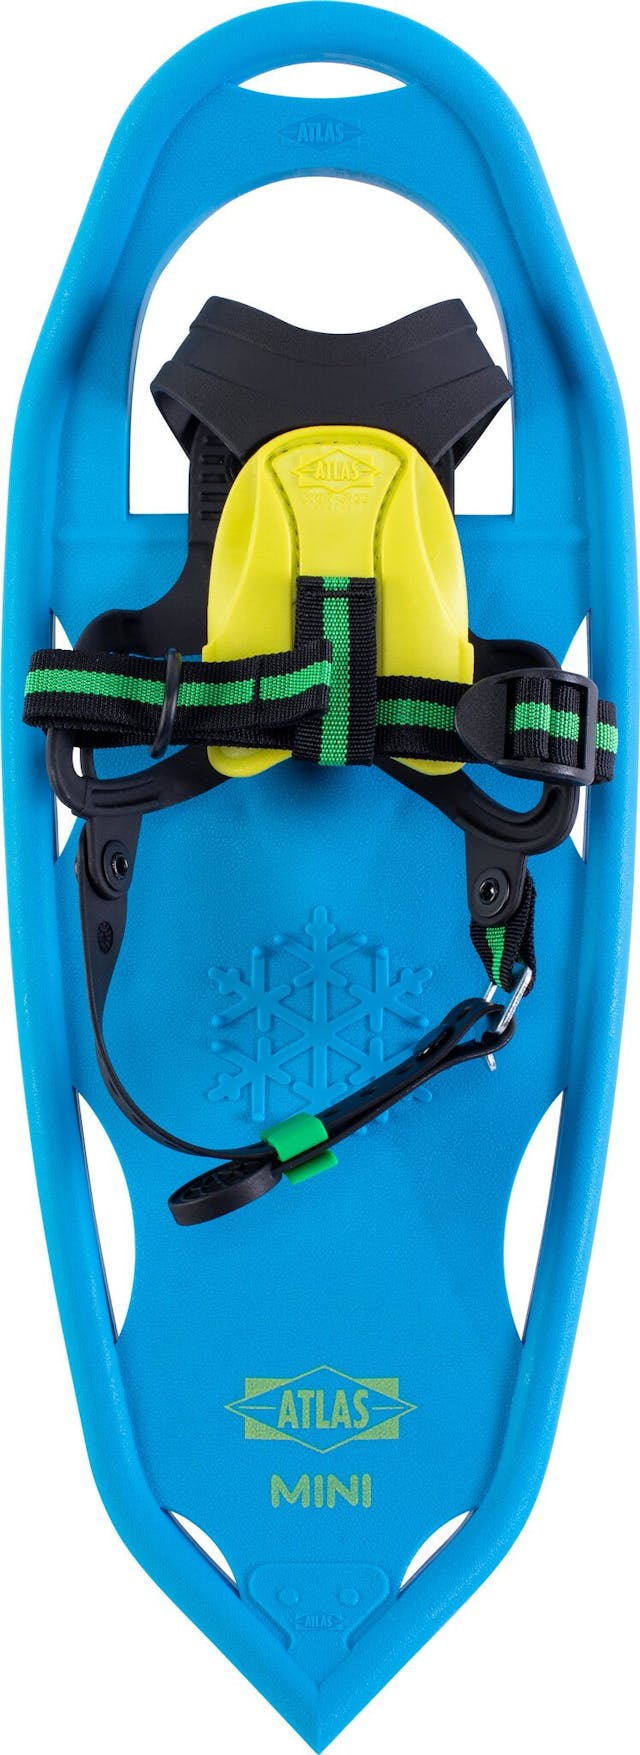 Product image for Mini 17 inches Snowshoes - Kids